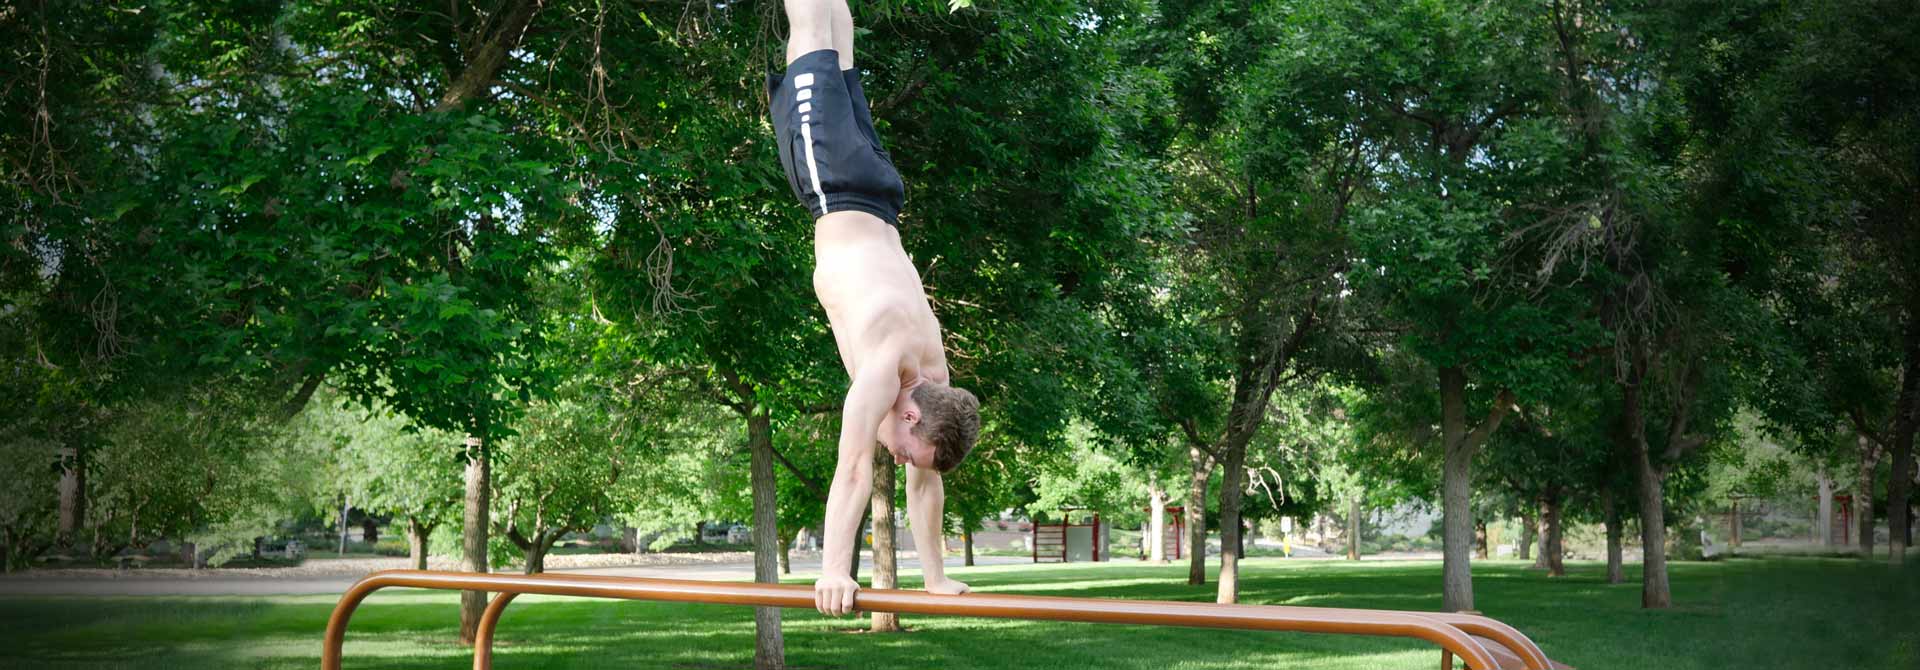 GymnasticBodies athlete shows confidence in his handstand.